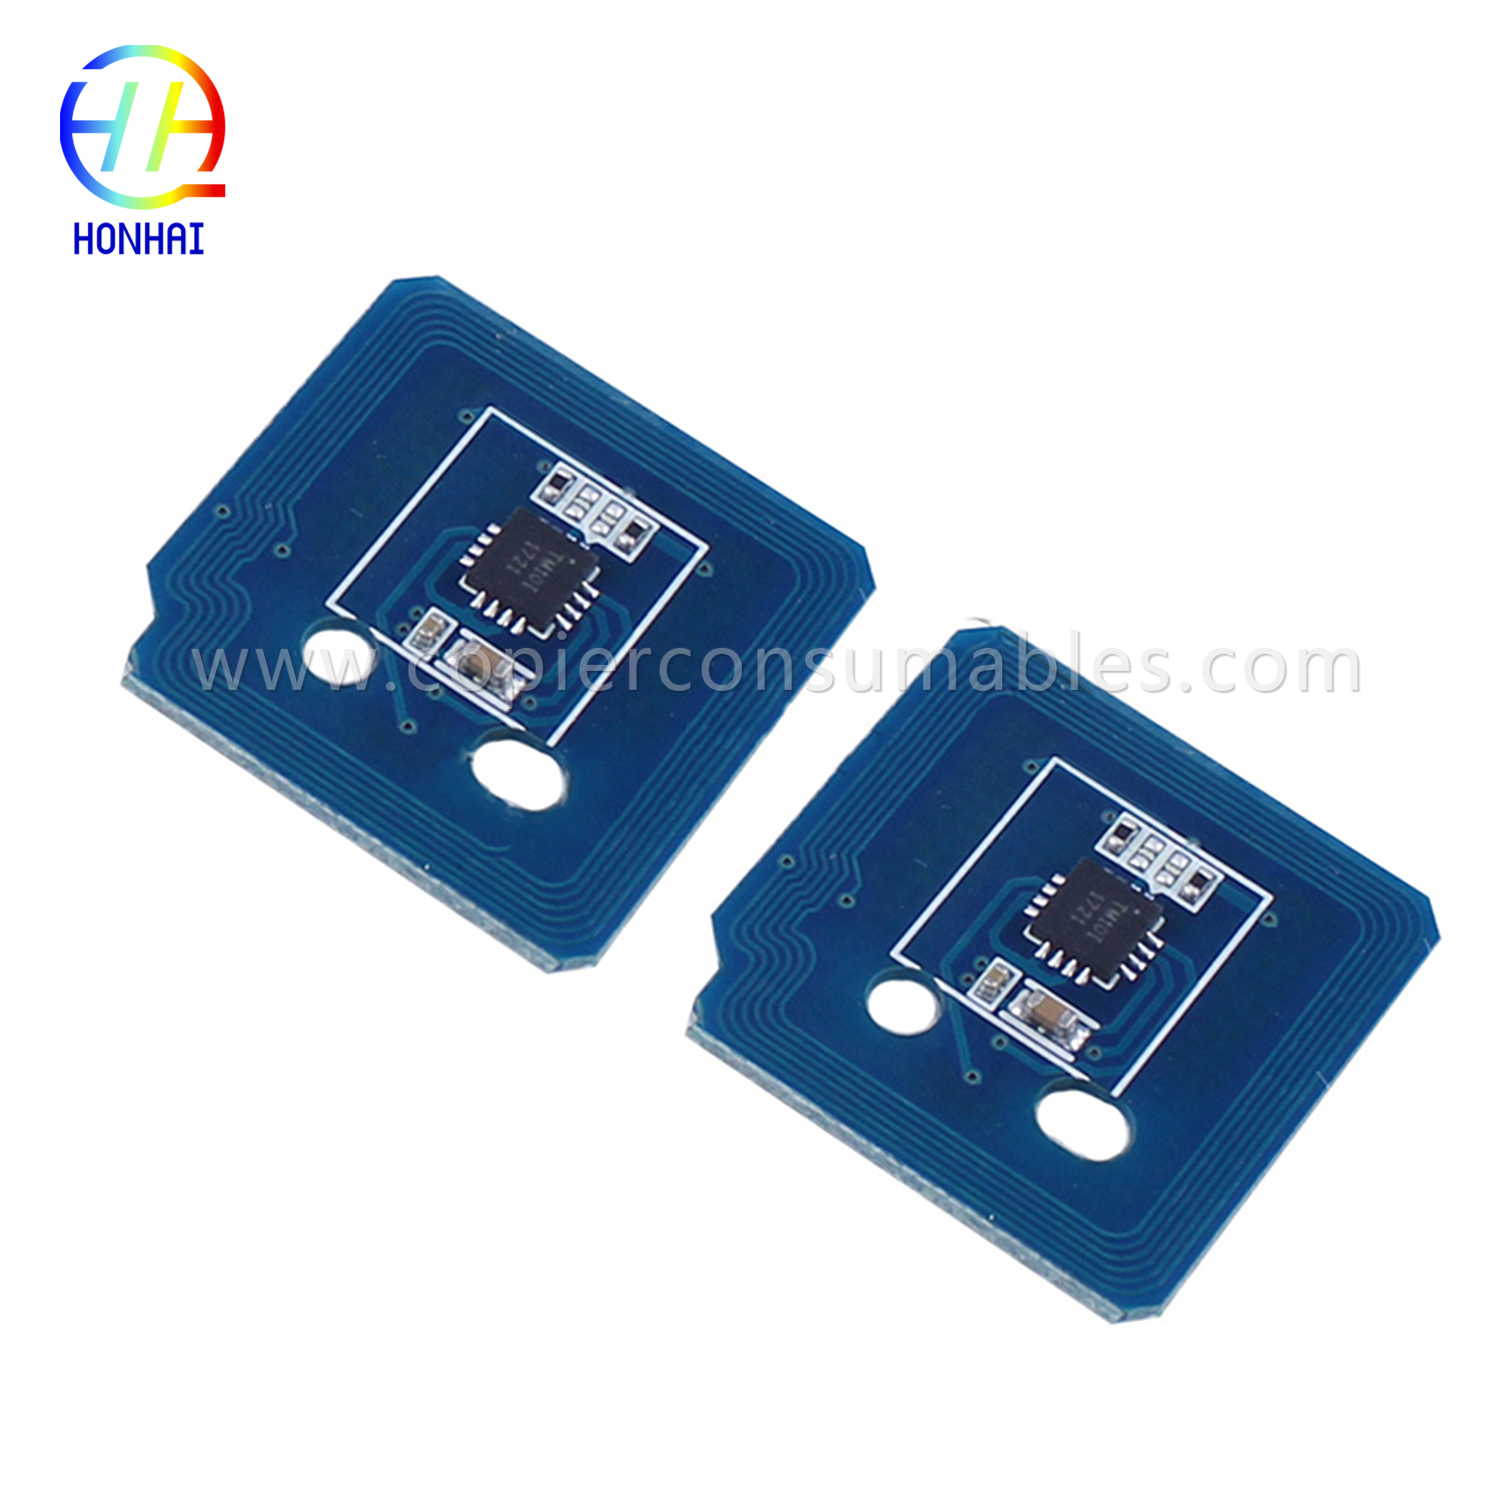 Toner Chip for Xerox Workcentre 5325 5330 5335 (006R01159 6R1159) (4) 拷贝